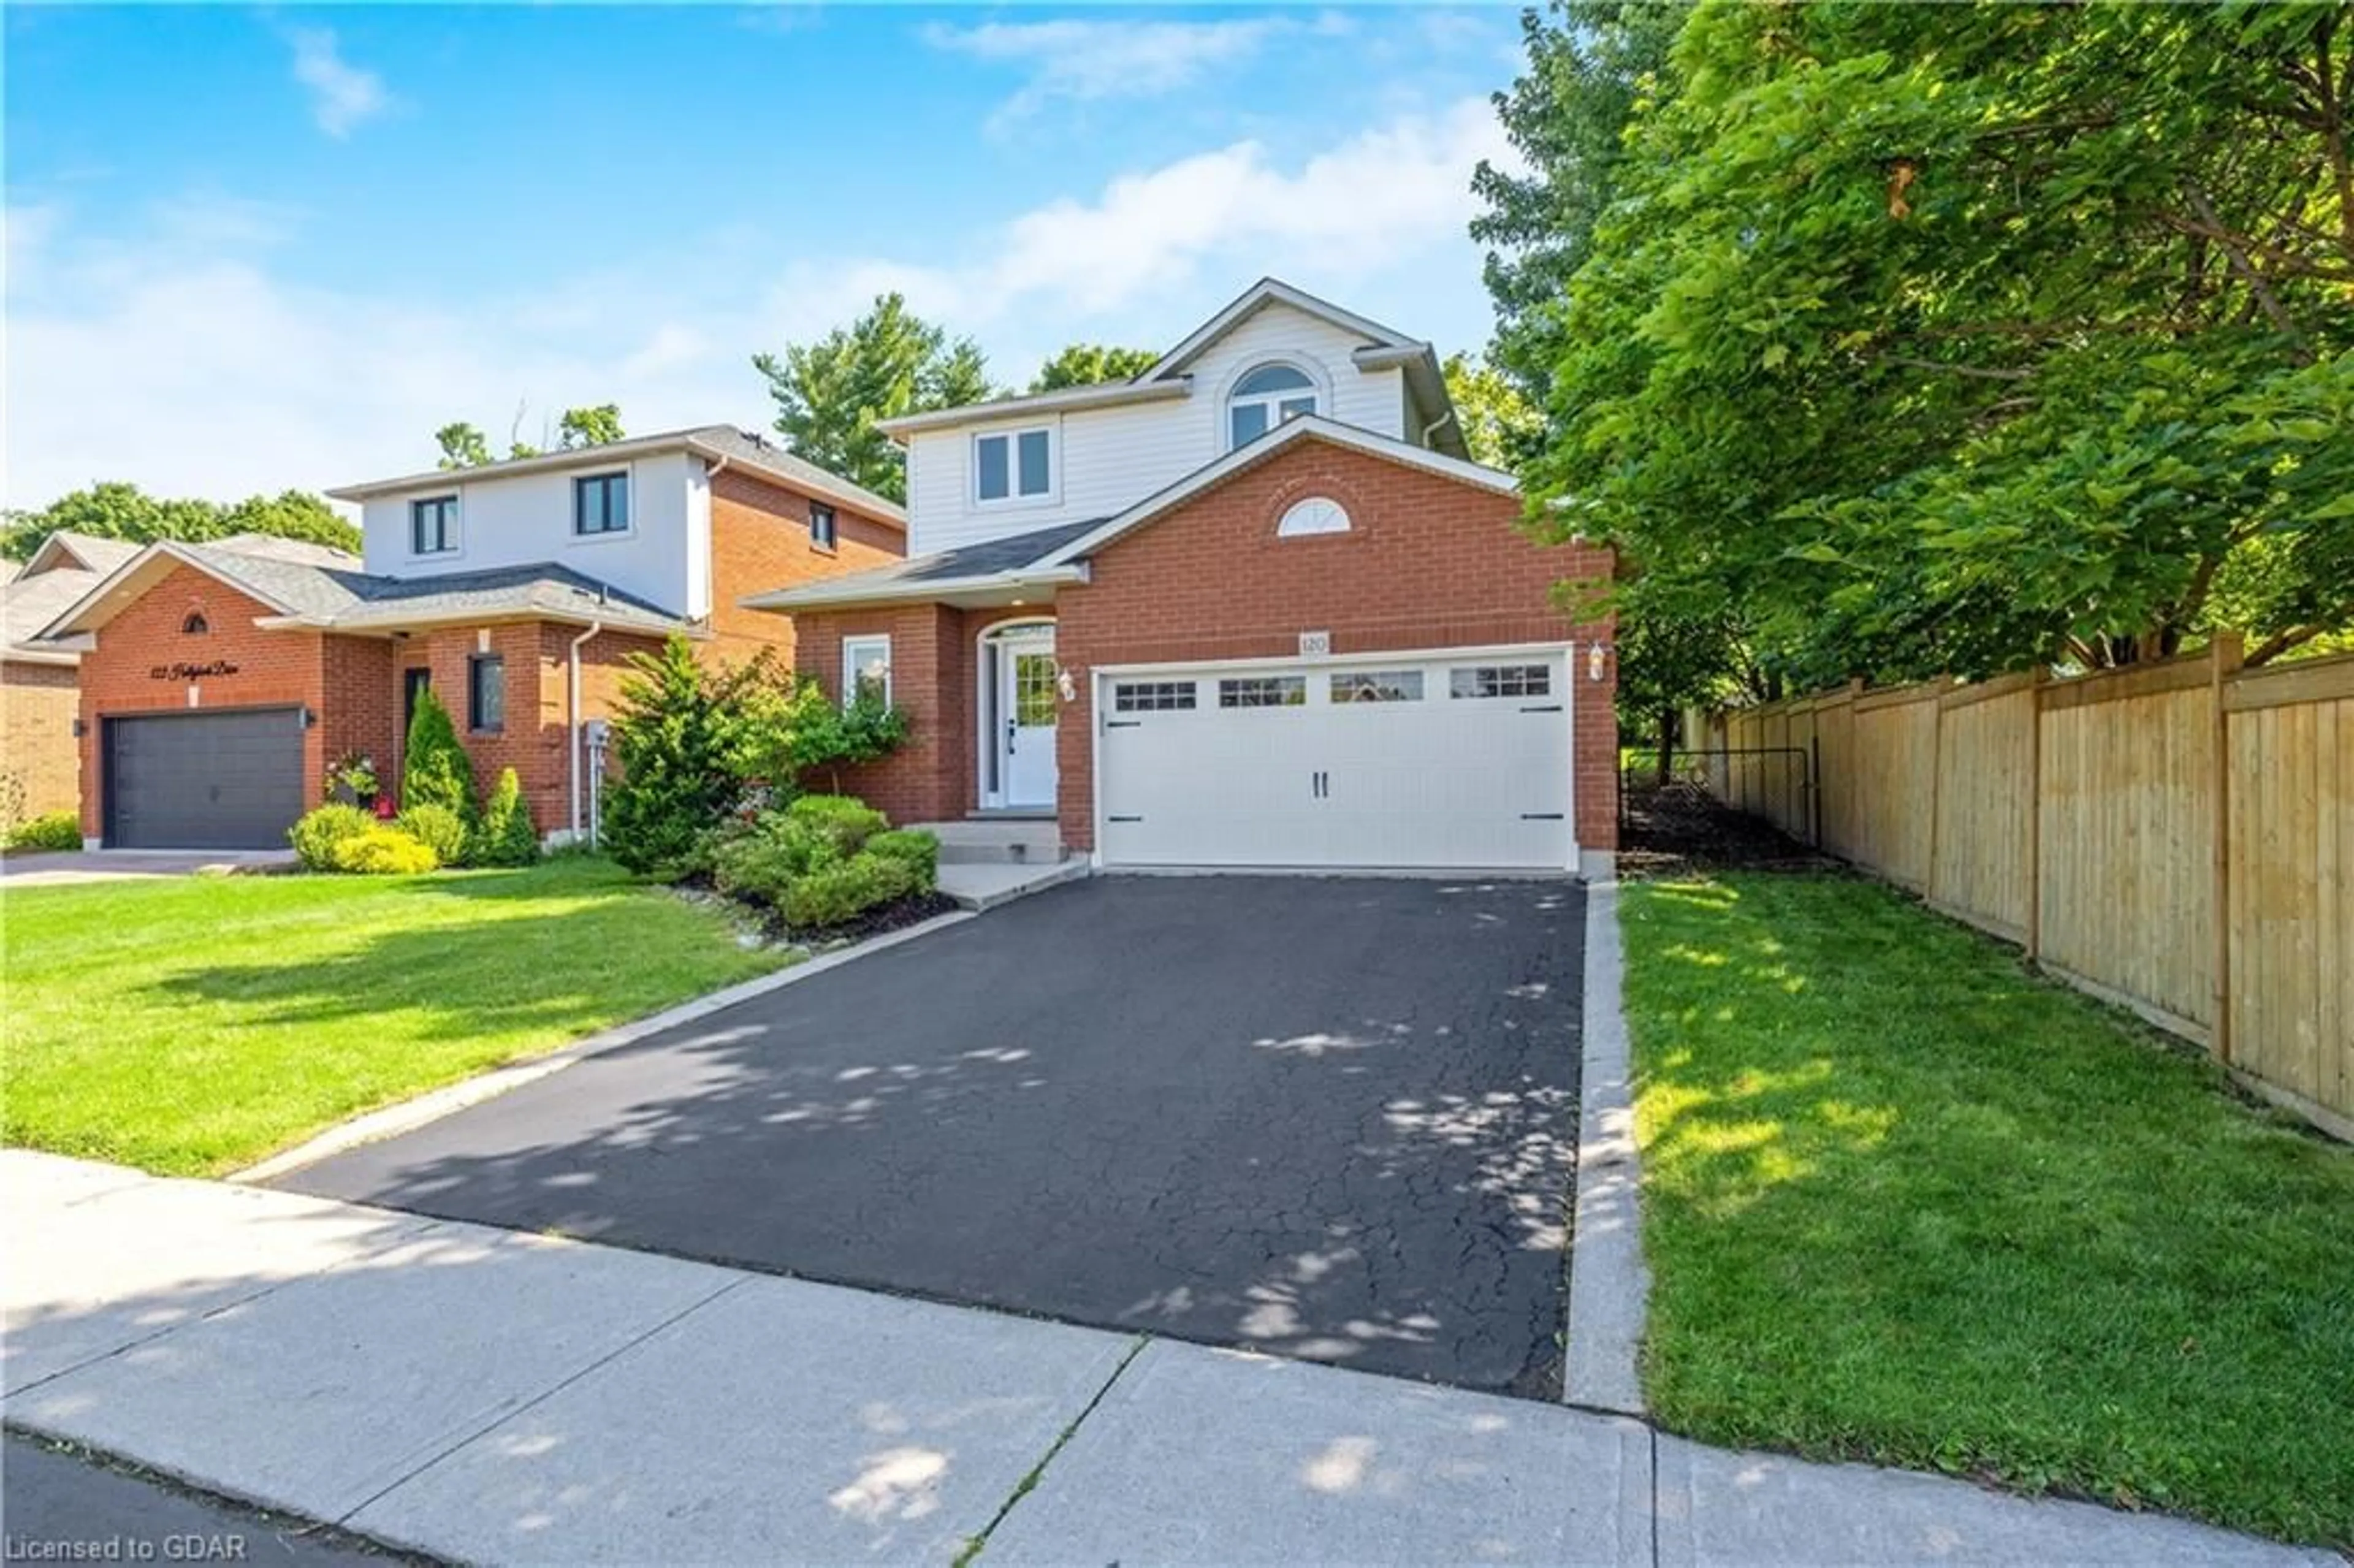 Frontside or backside of a home for 120 Hollybush Dr, Waterdown Ontario L0R 2H5